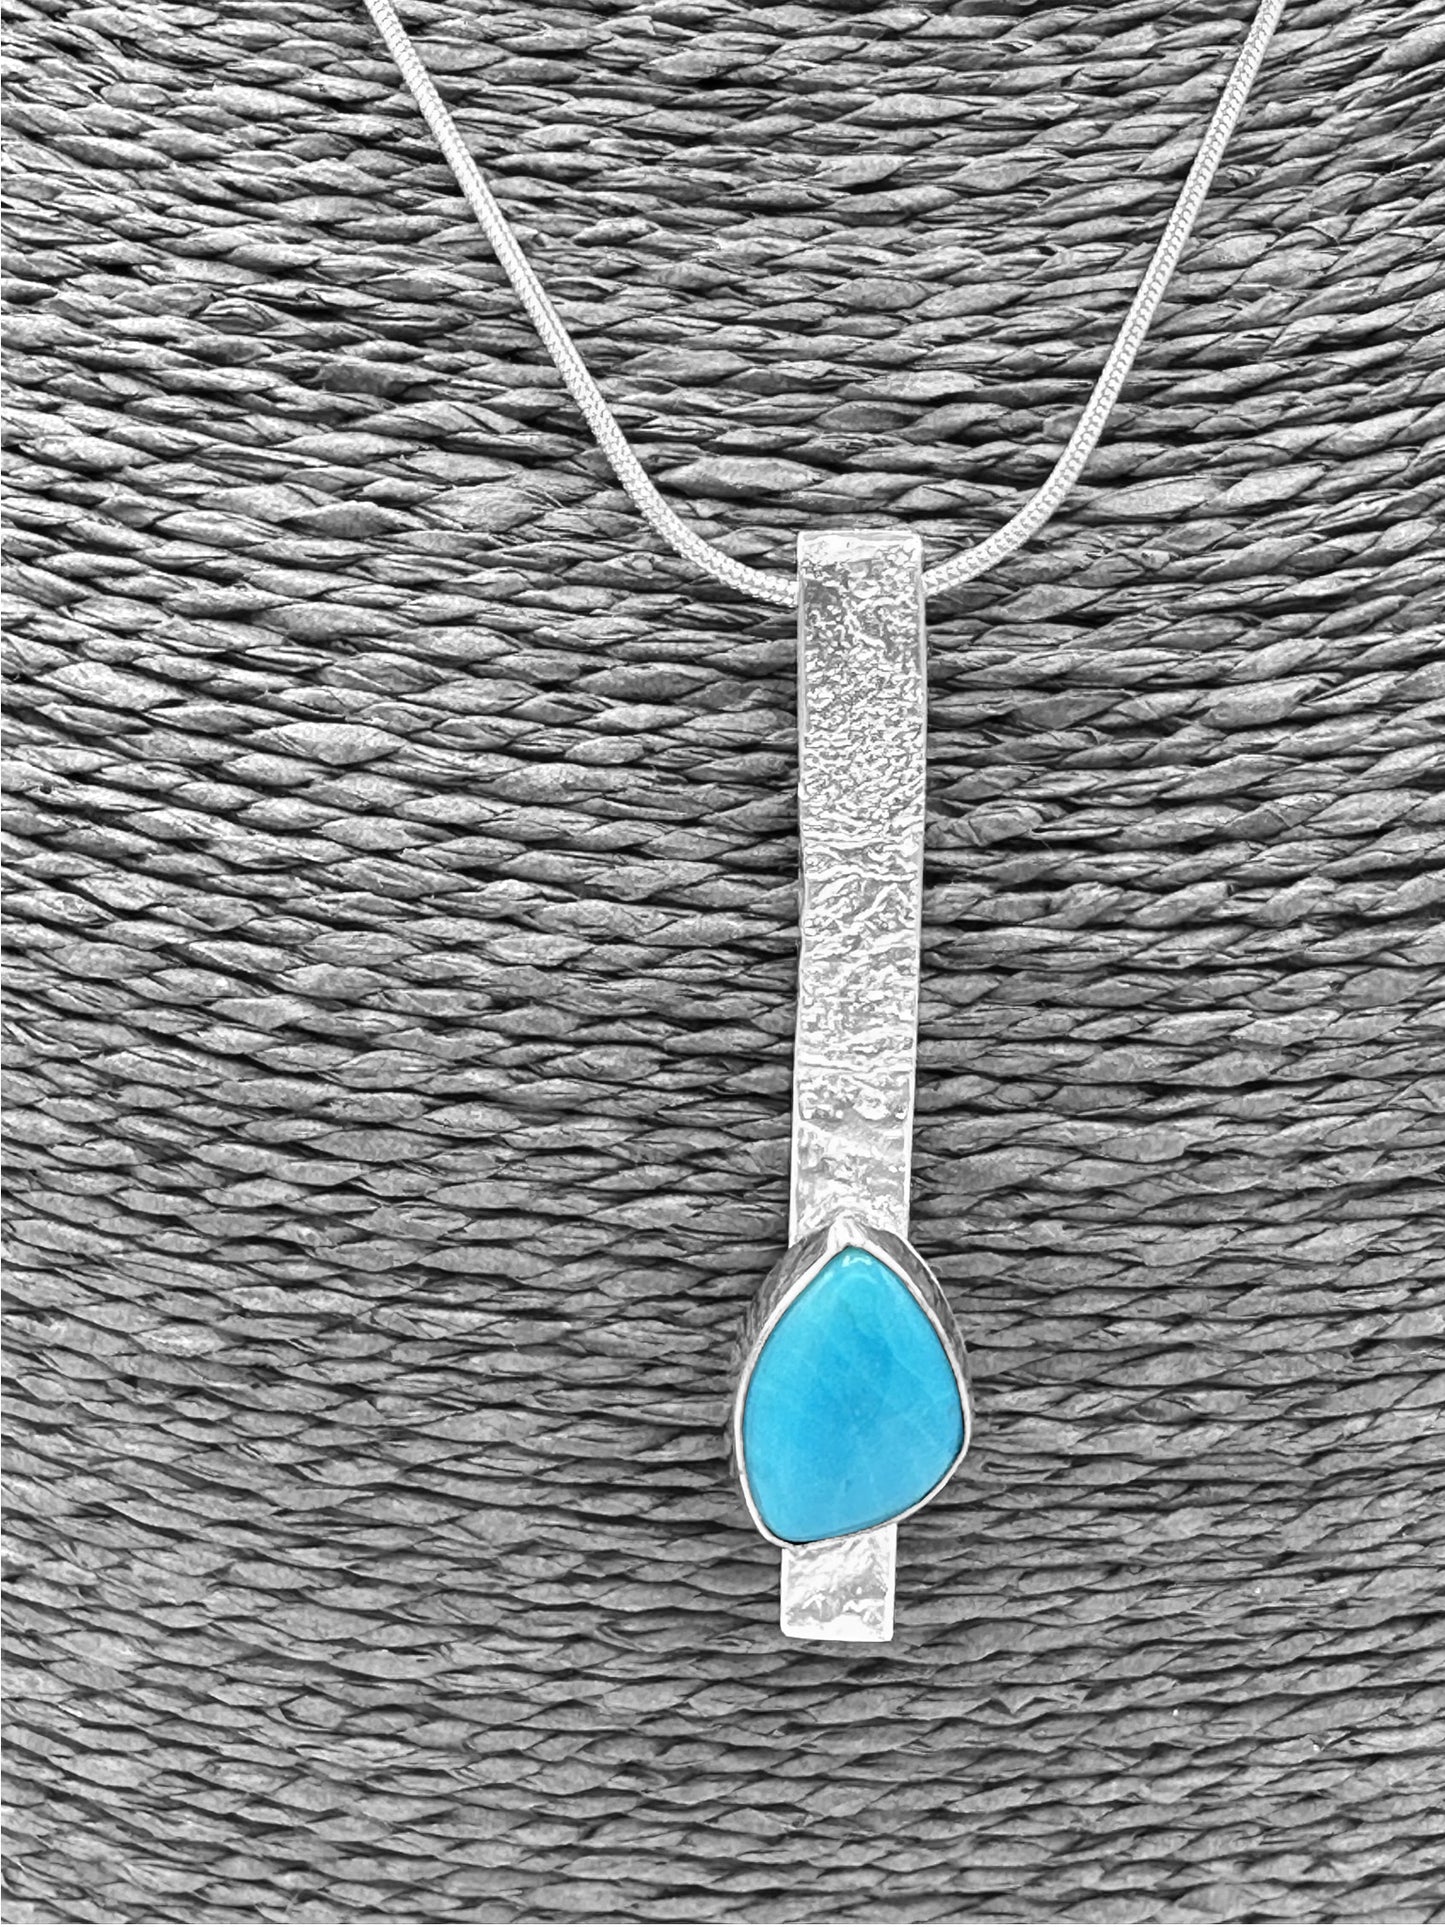 Reticulated Silver, Turquoise Pendant